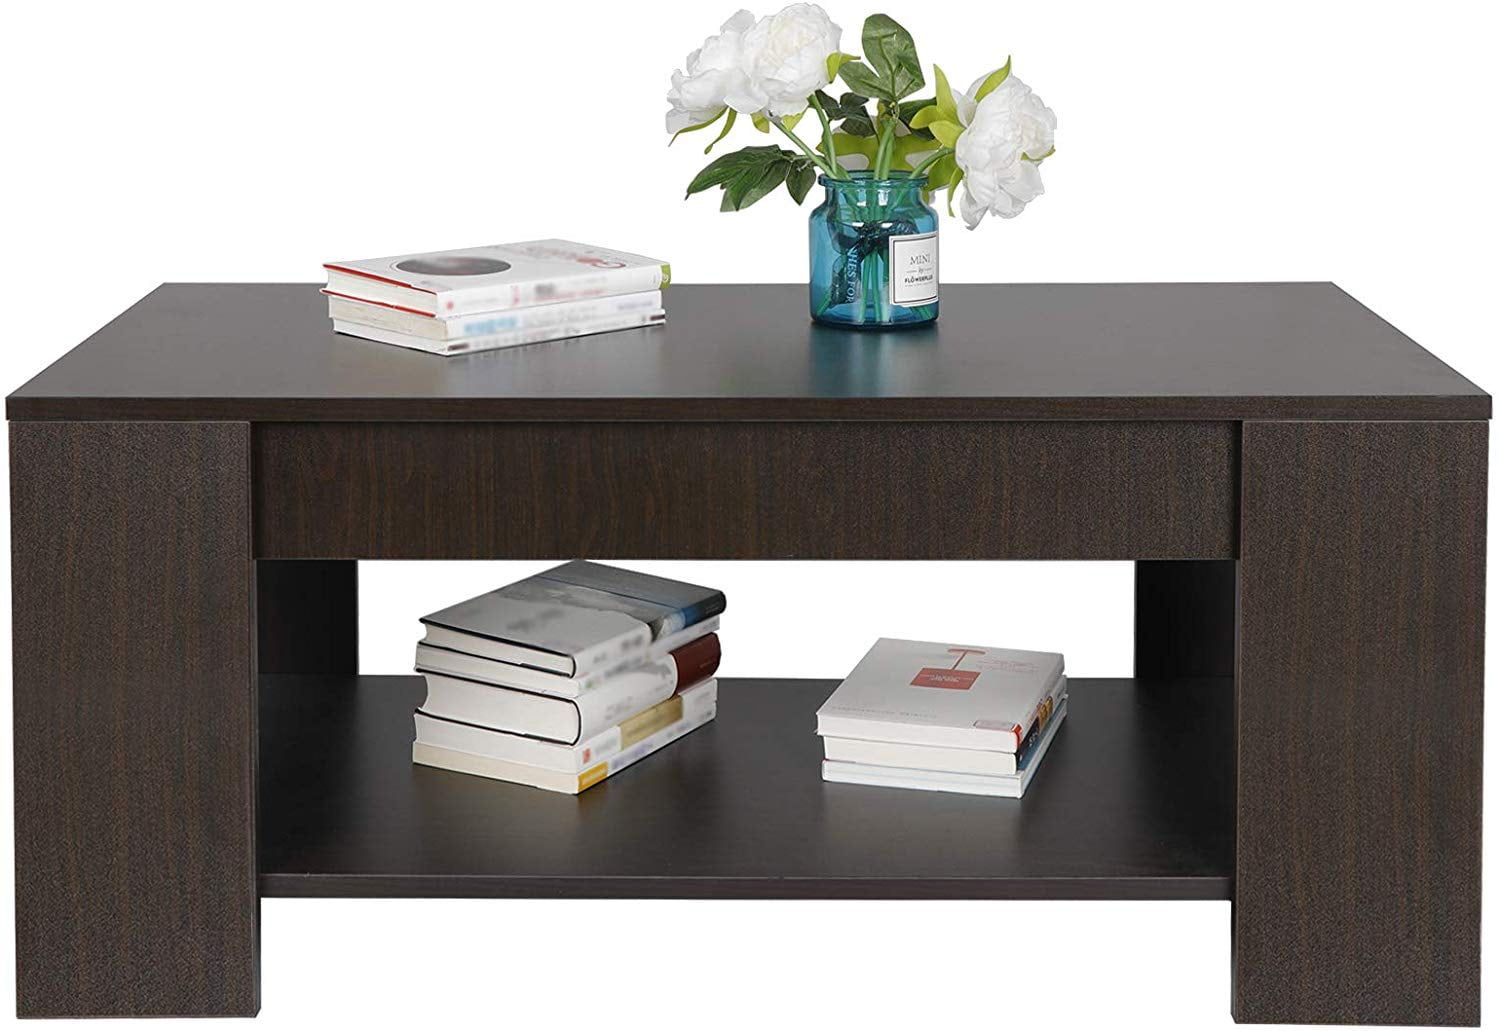 Zenstyle Lift Top Coffee Table Hidden Storage Cabinet Compartment Long Pertaining To Lift Top Coffee Tables With Hidden Storage Compartments (Photo 13 of 15)